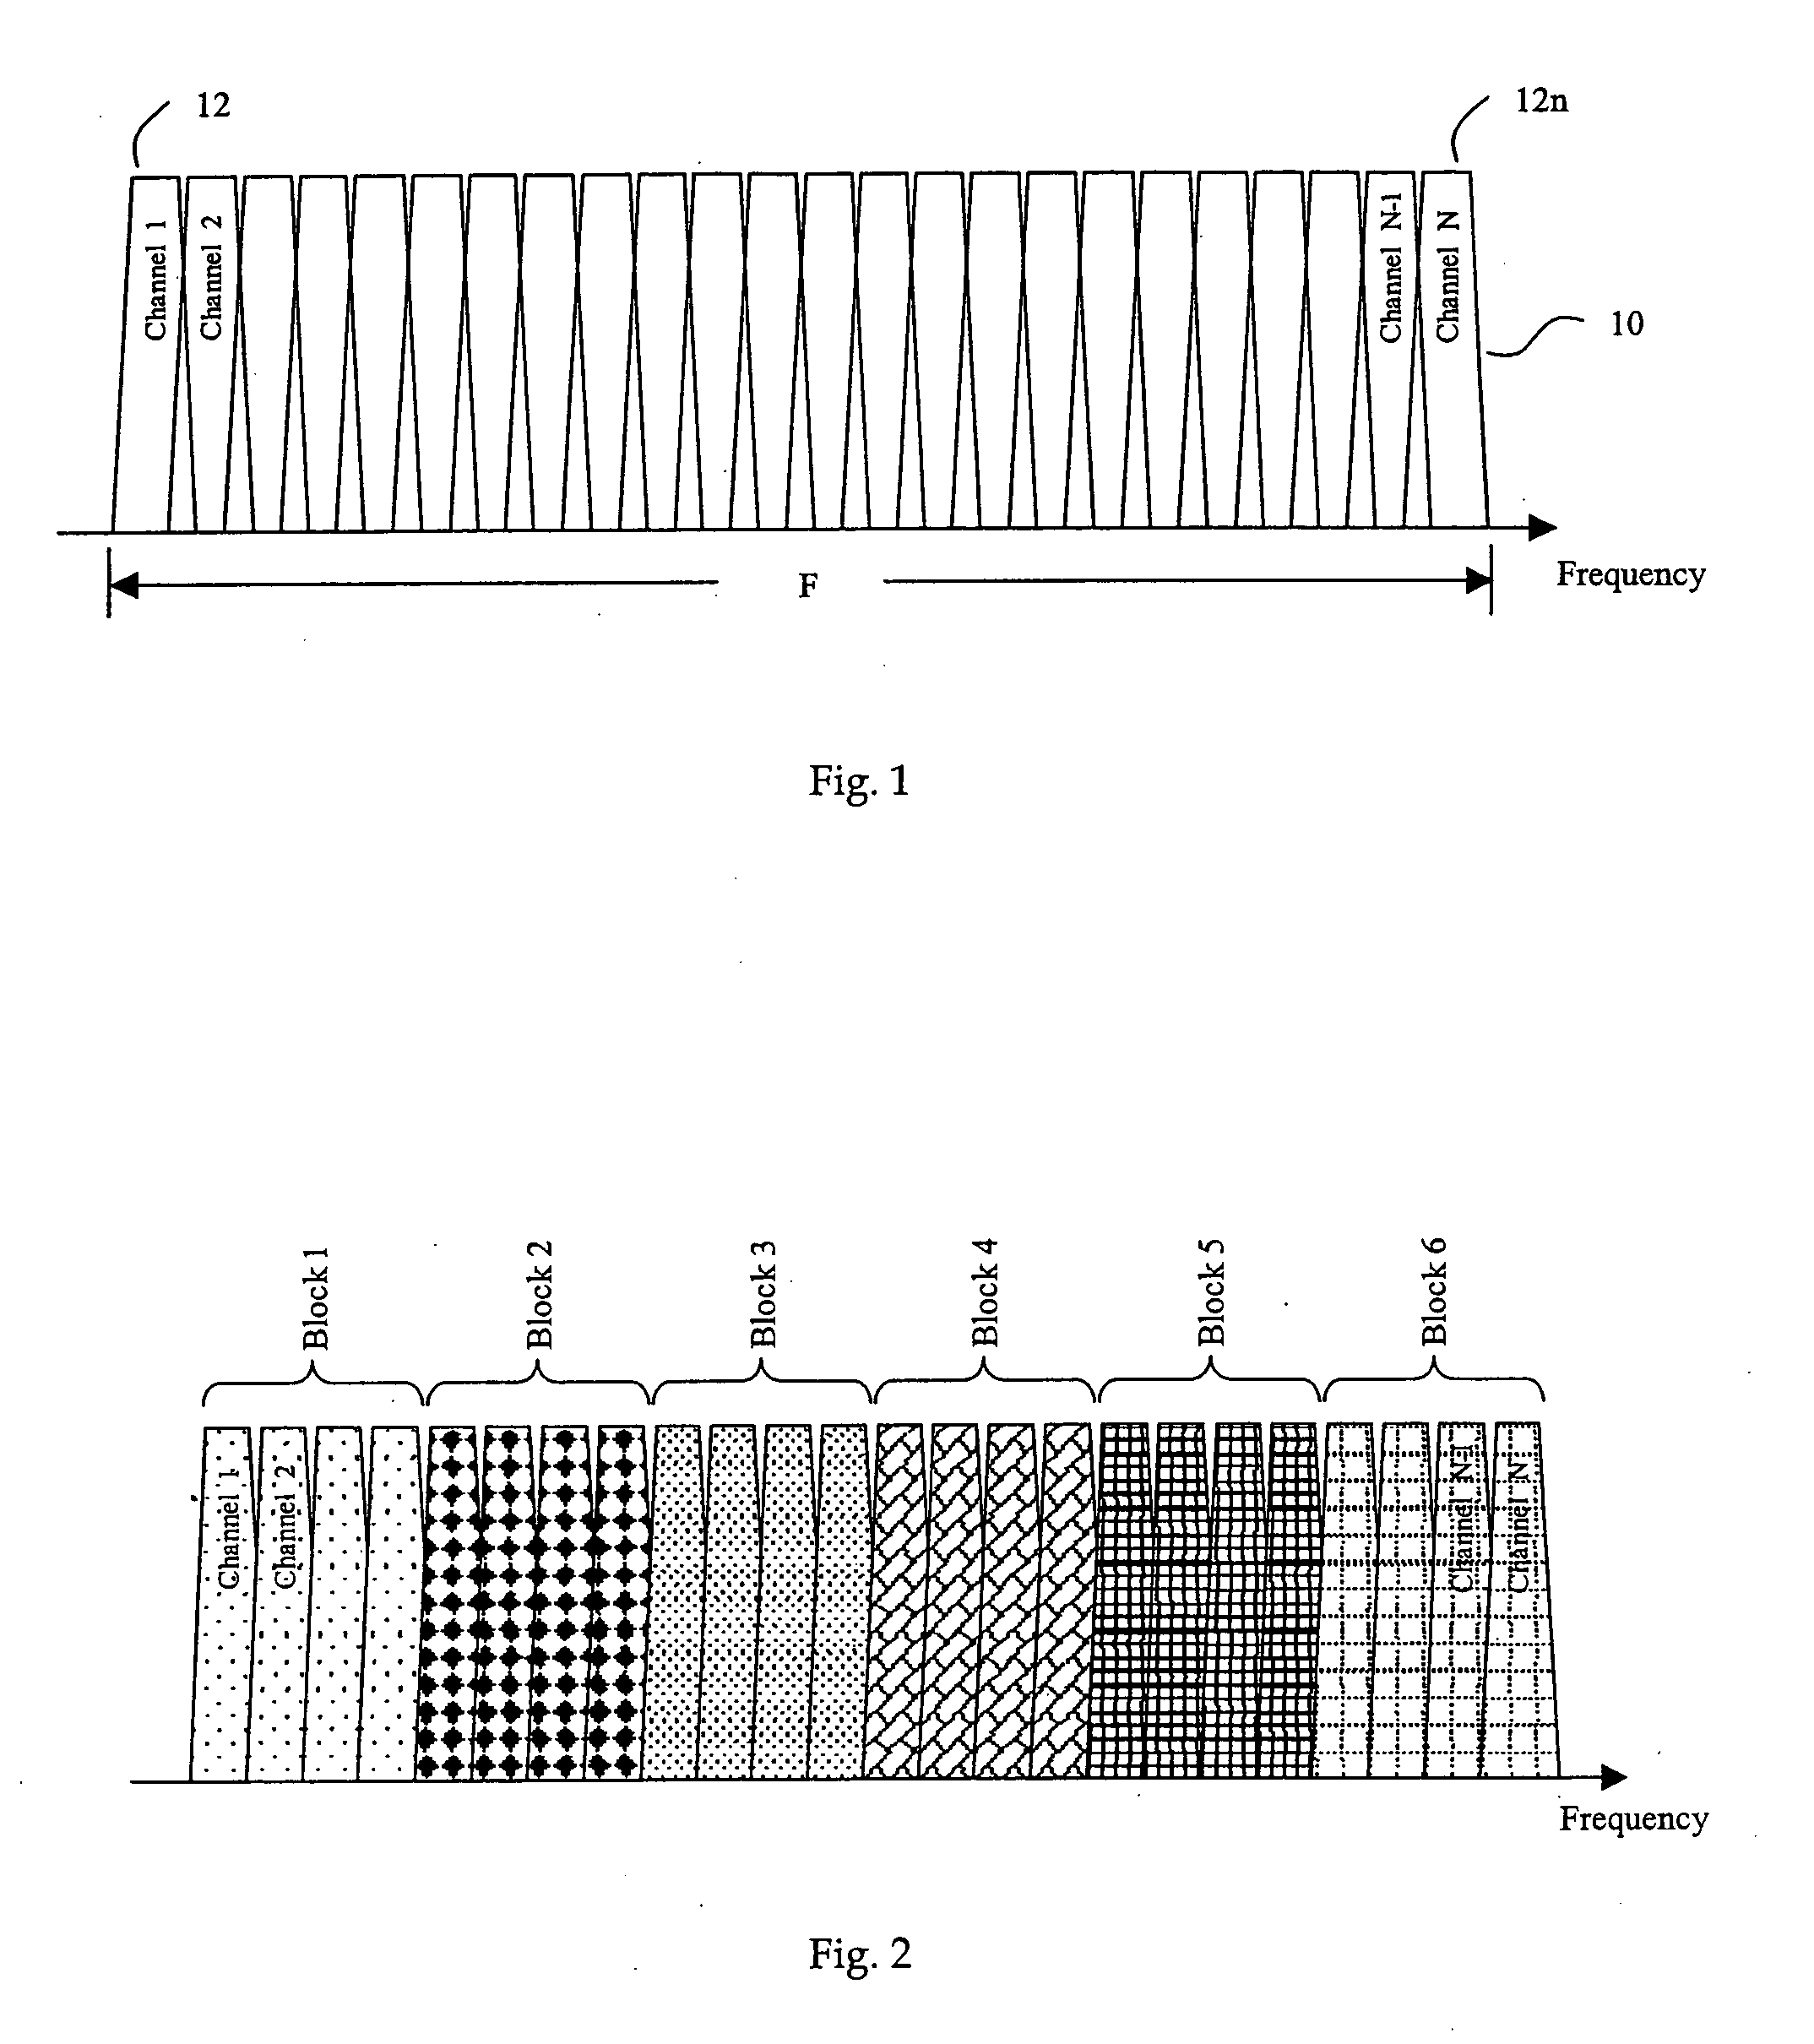 Method and system for reducing wireless multi-cell interferences through segregated channel assignments and segregated antenna beams